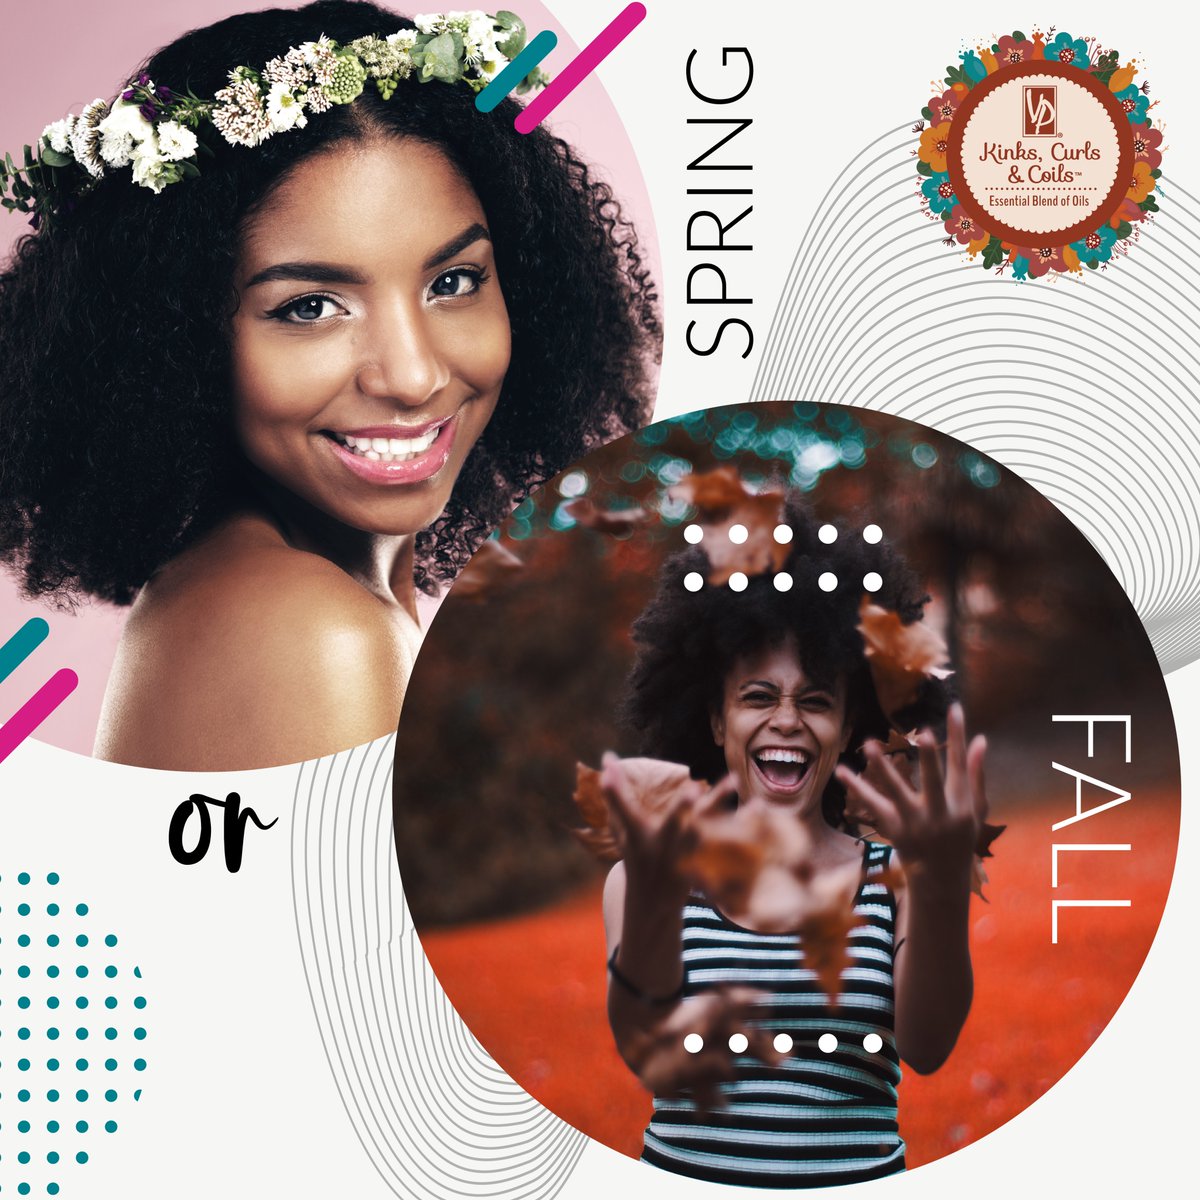 We want to hear from our audience! Which season do you prefer? Comment down below 👇💕
.
.
#afamconcept #springseason  #fallseason #protectivestyles #naturalhaircare #naturalhaircareproducts #haircareproducts #naturalhair #coilyhair #kinkyhair #curlyhair #naturalhairstyles